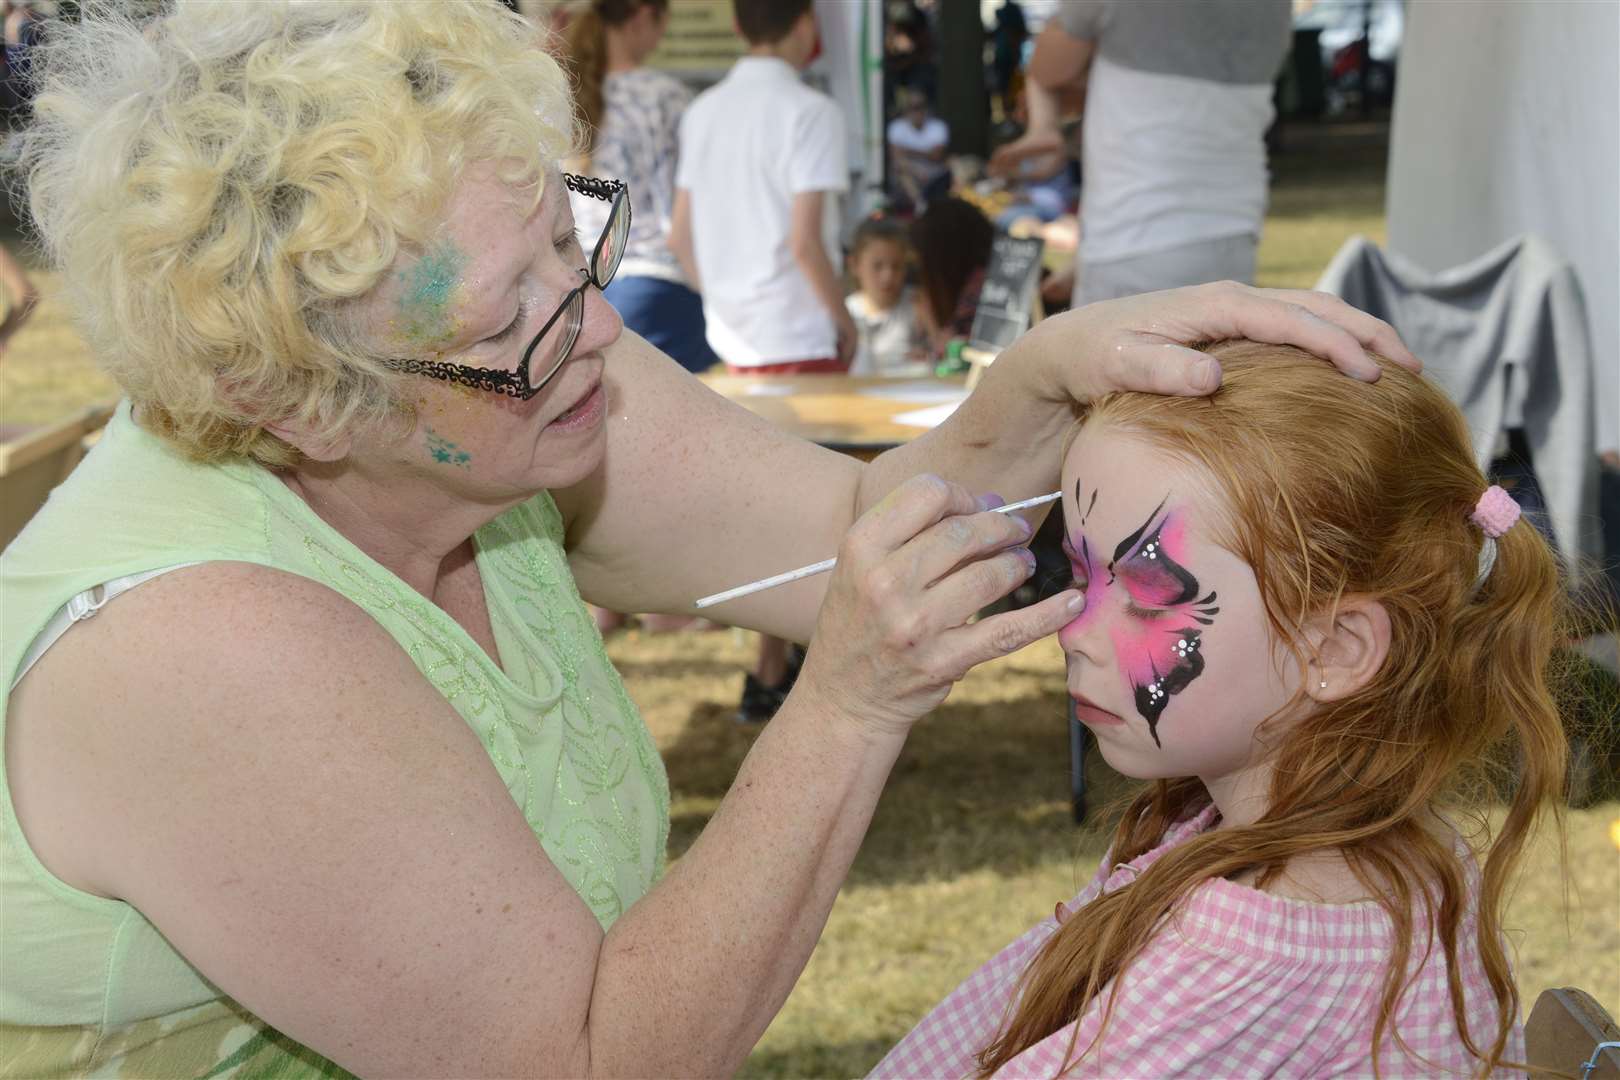 Festival goers are last year's Create event